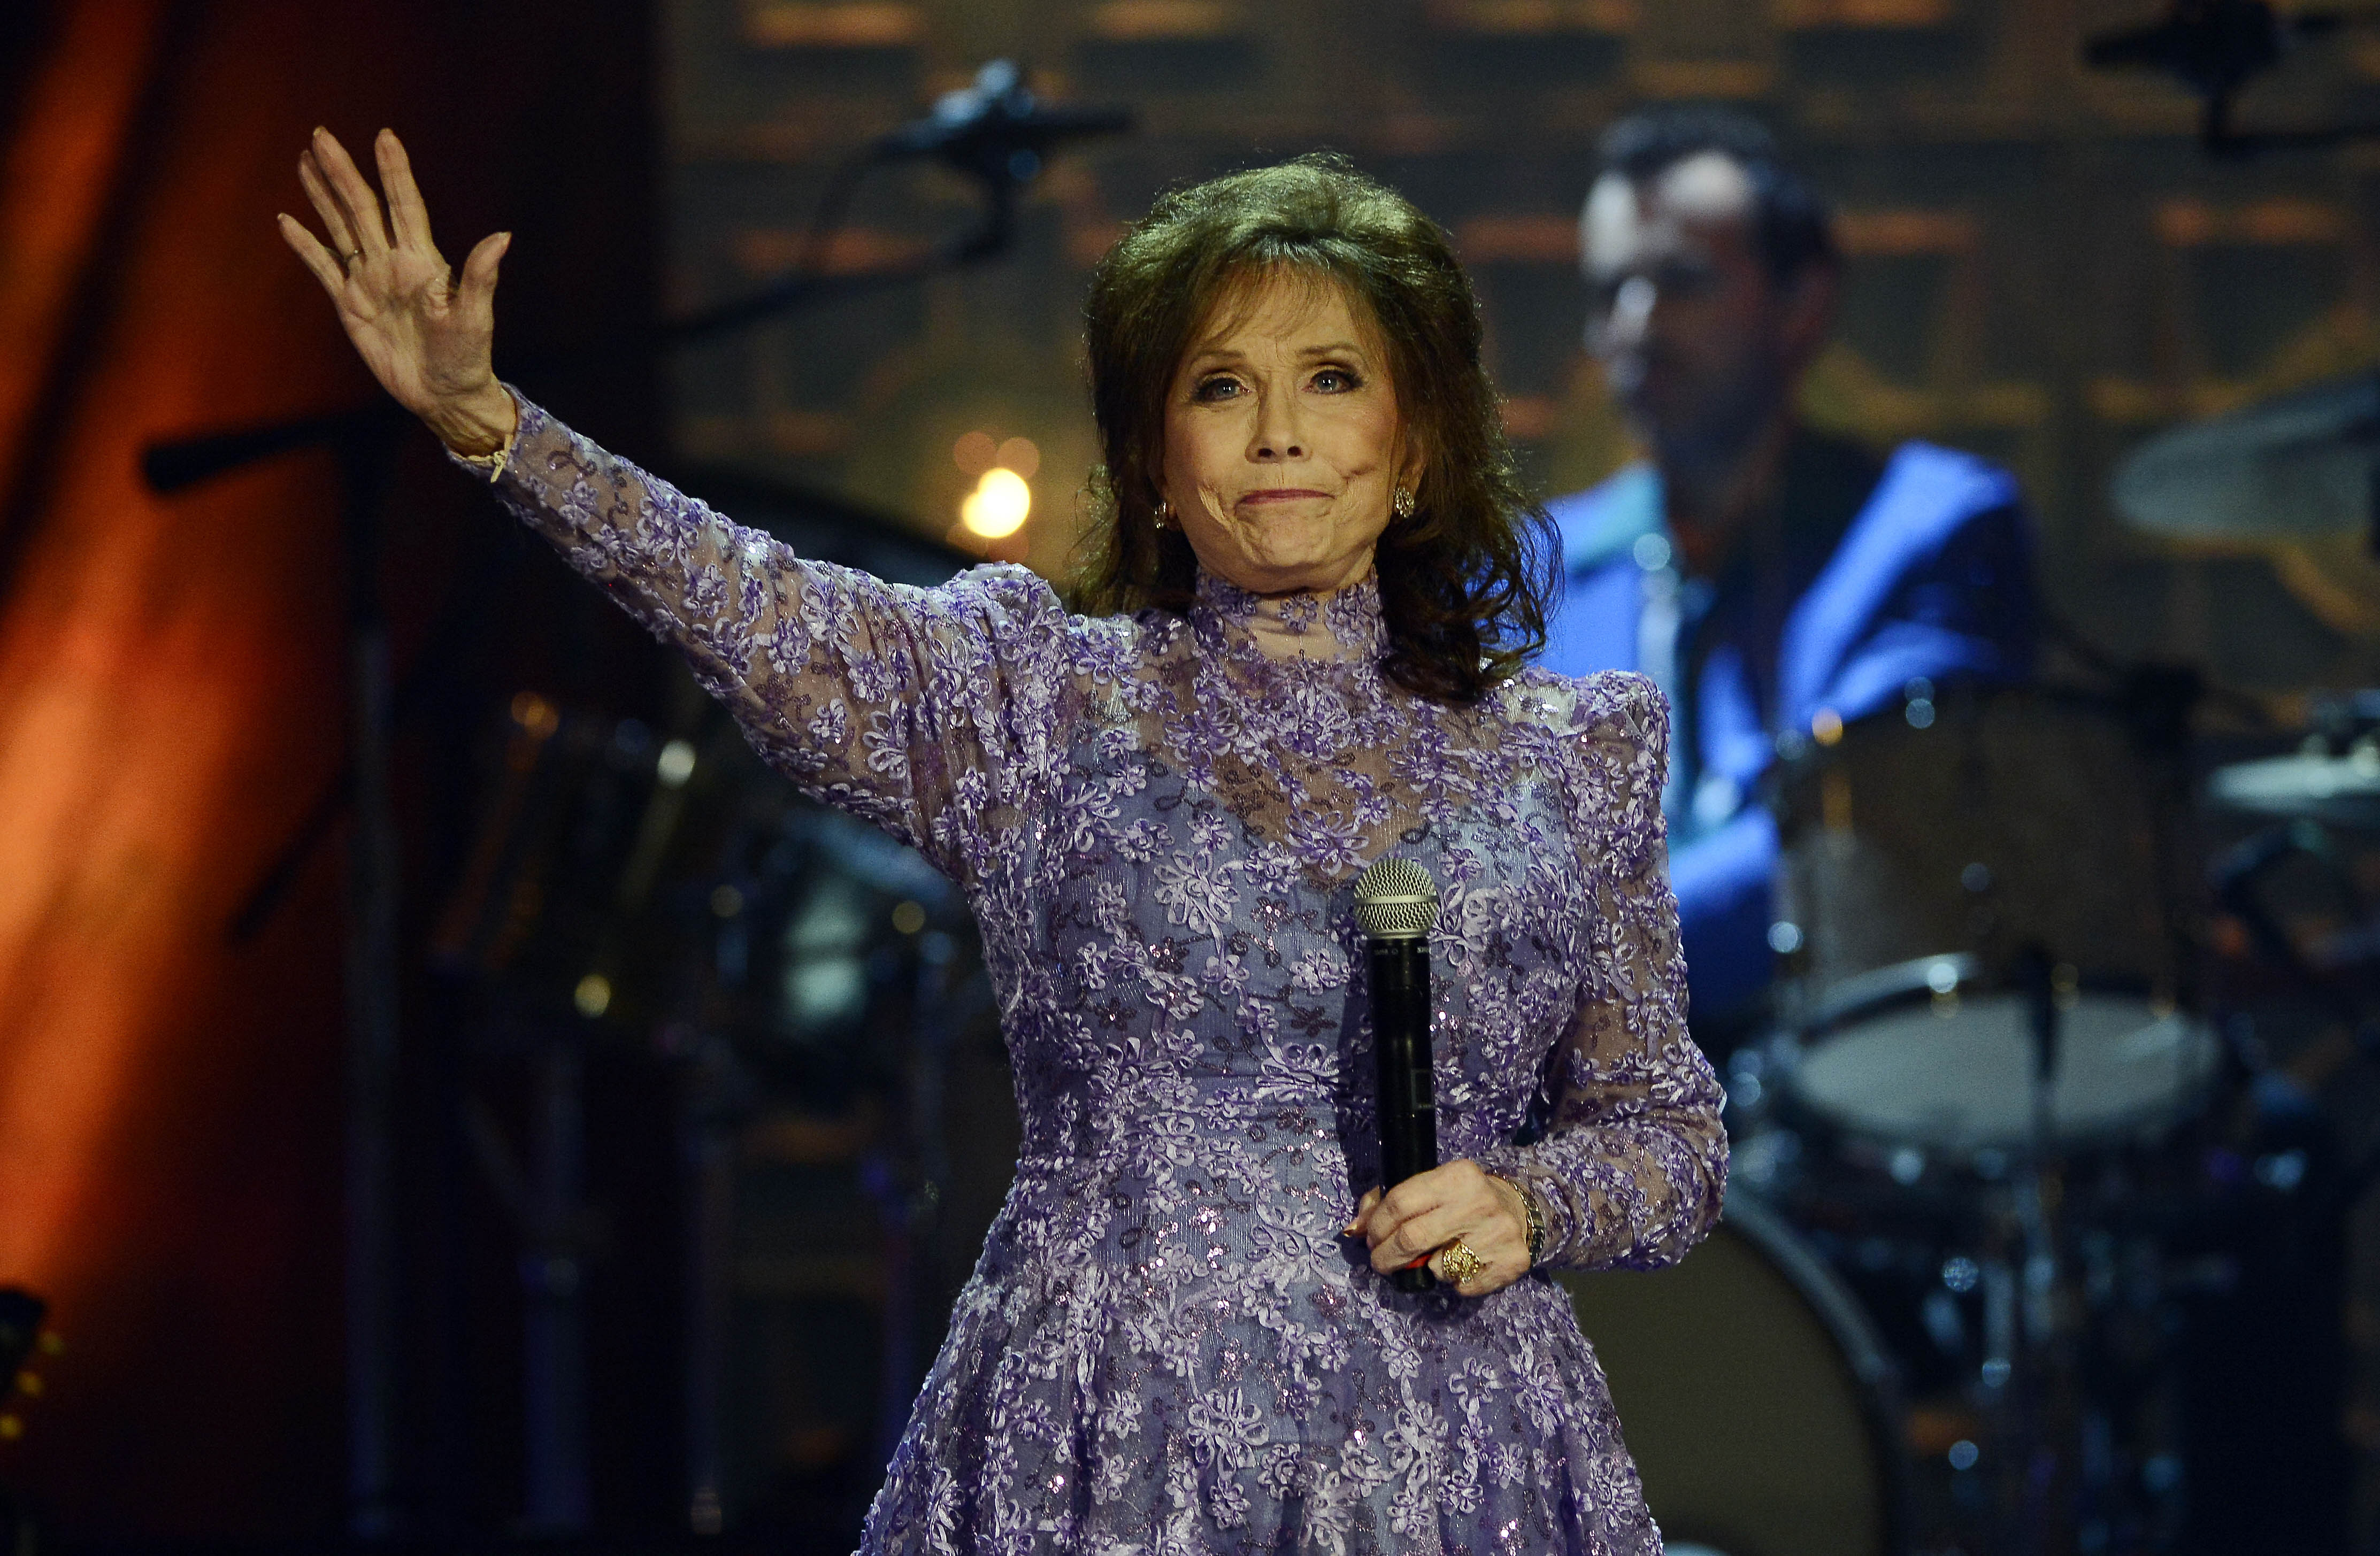 Loretta Lynn, Coal Miner’s Daughter and Country Queen, Dies